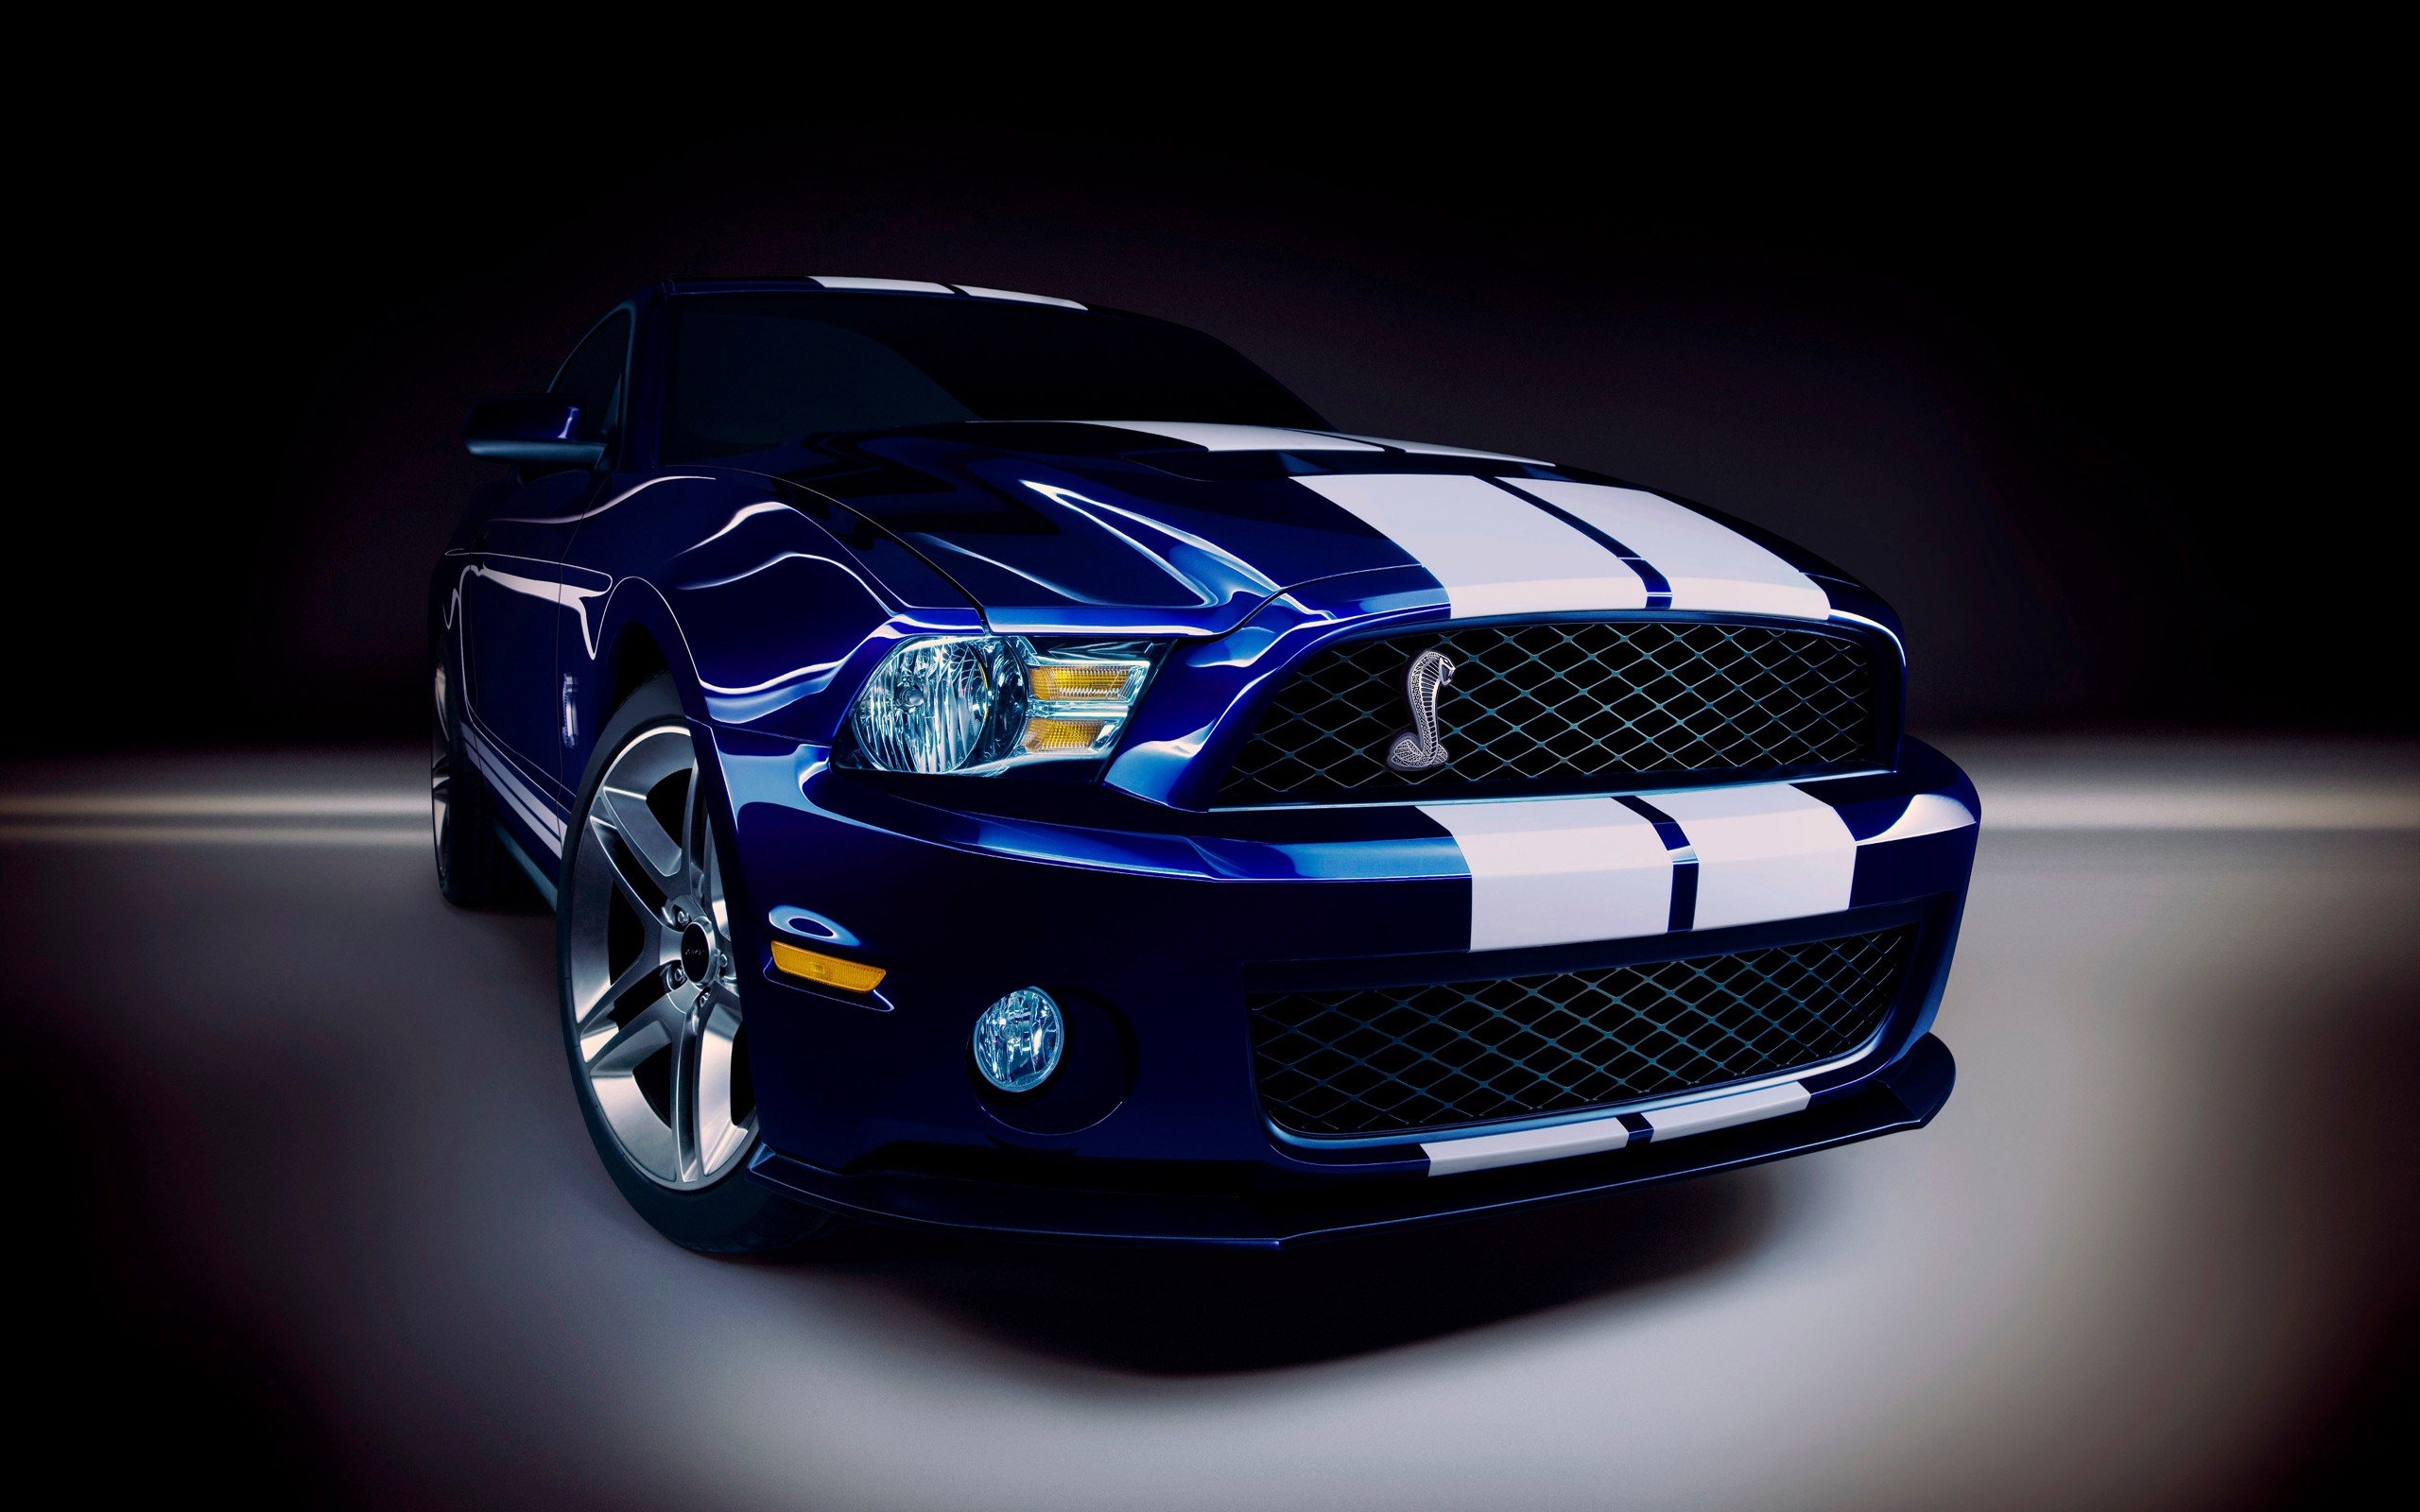 Cars vehicles ford mustang shelby cobra emblem wallpaper background